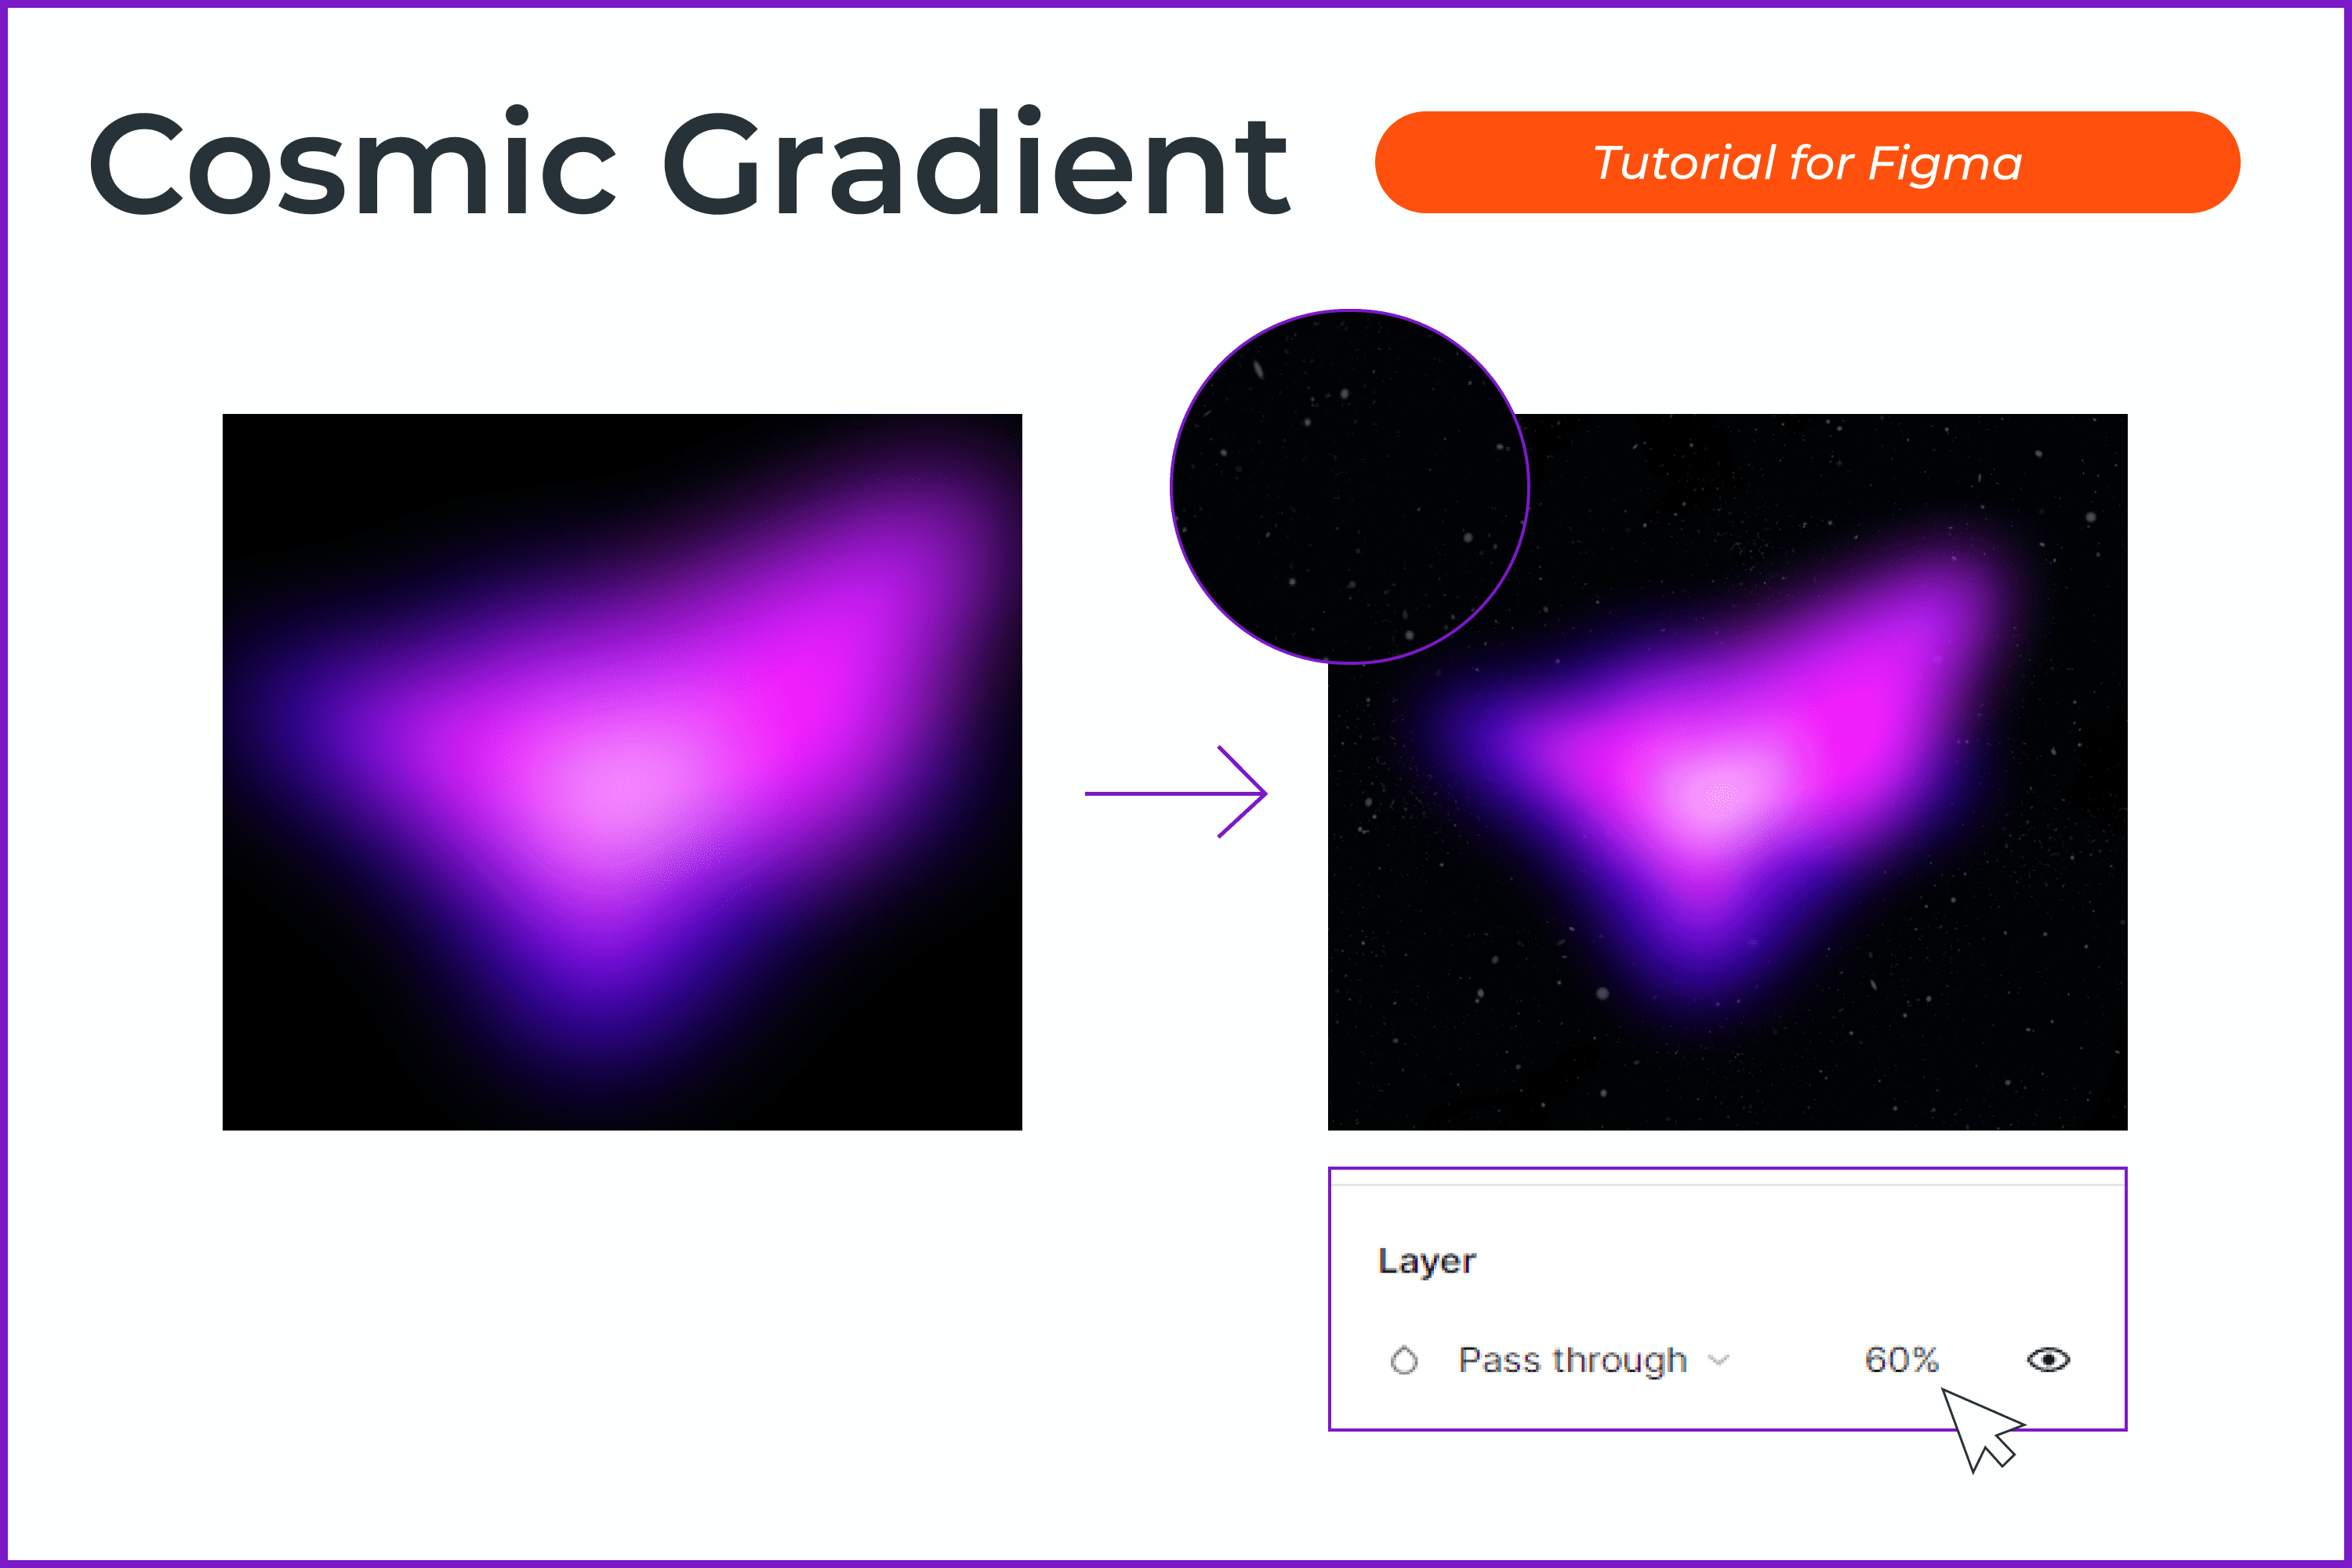 Select the group with the gradient and reduce its opacity so that it looks more natural.